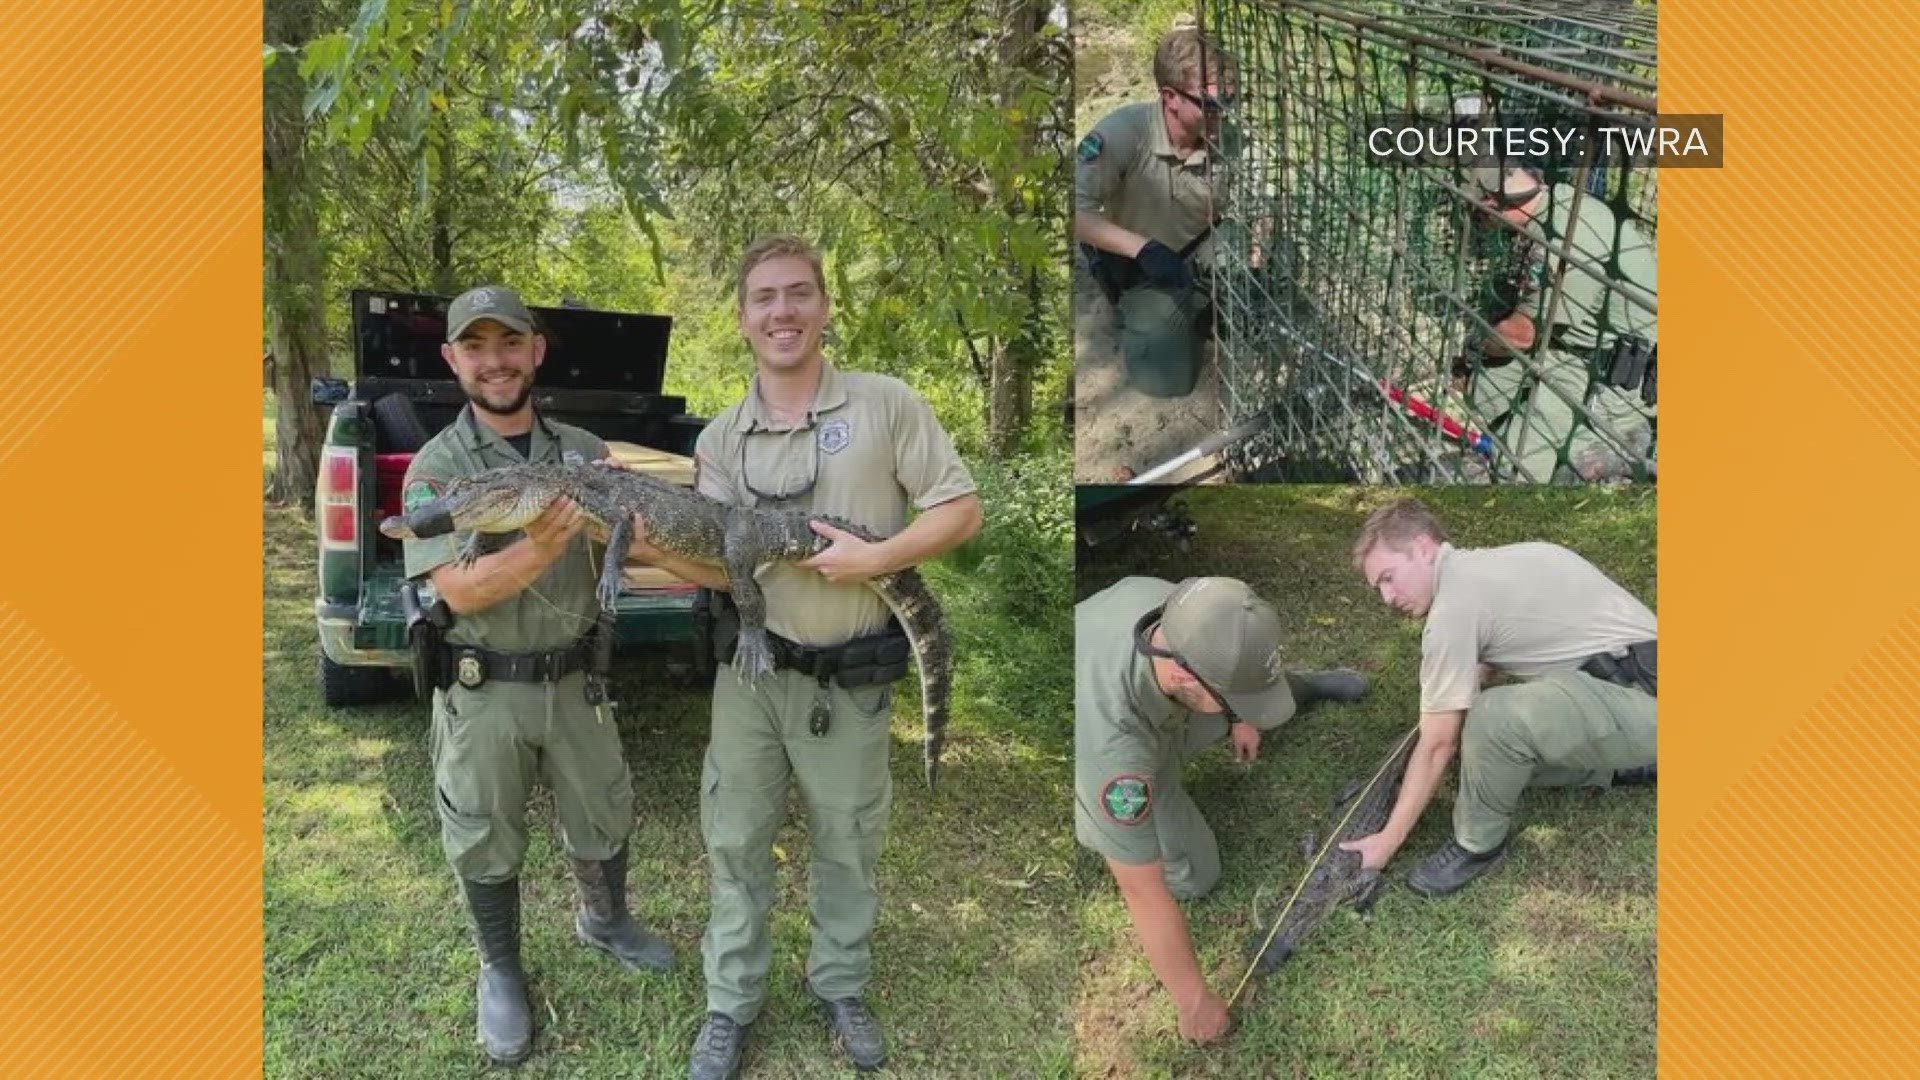 Alligators are invasive in many parts of Tennessee. Agents believe this gator belonged to someone who dumped it. This gator was taken to the Chattanooga Zoo.